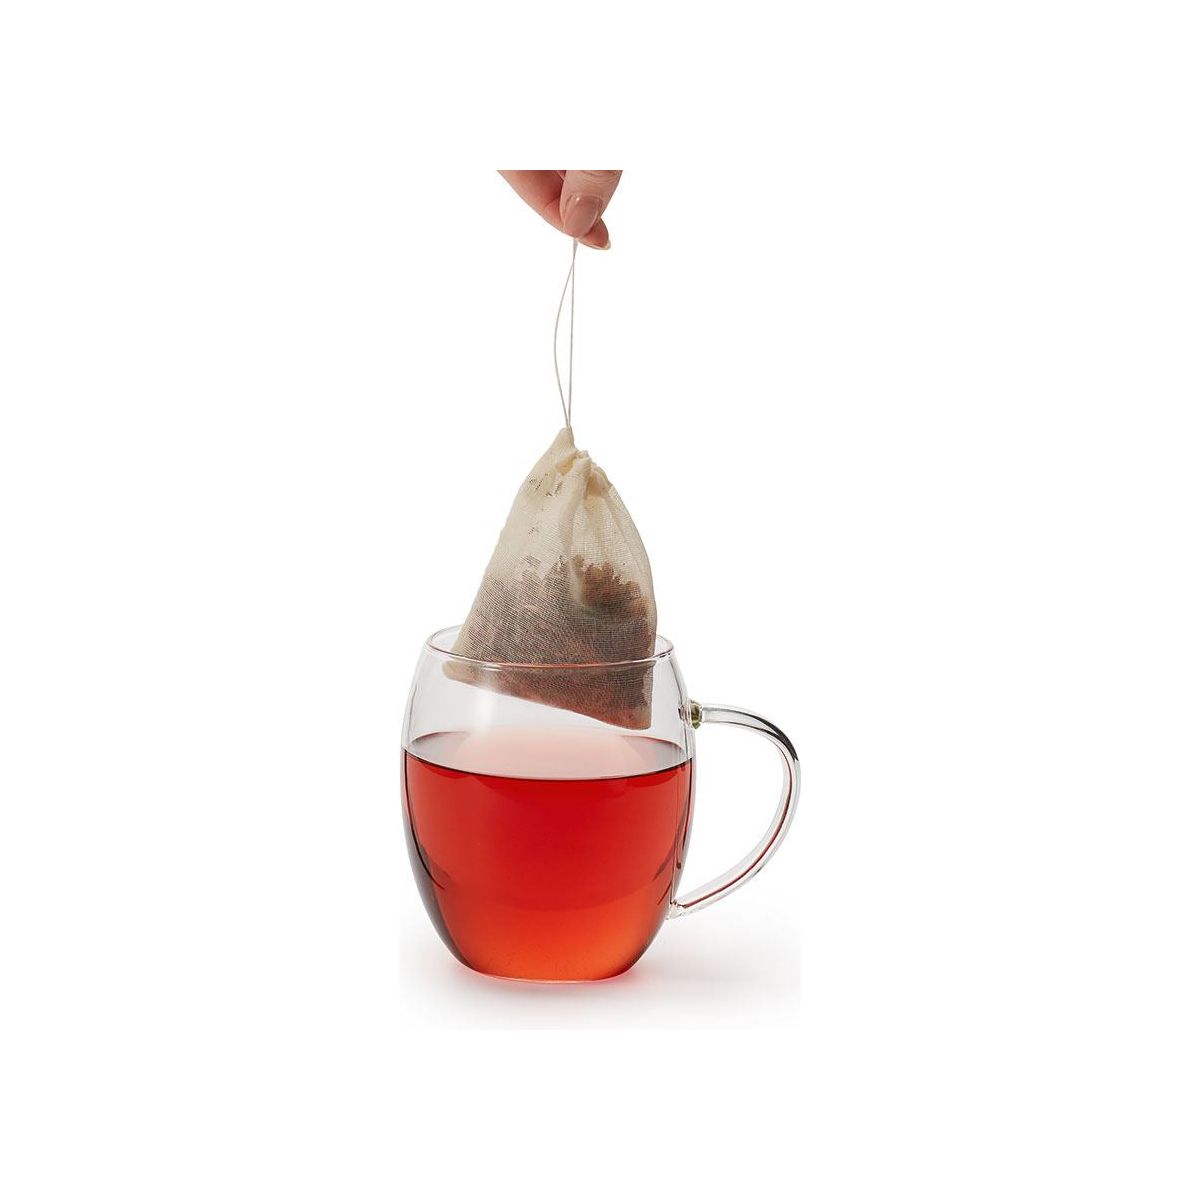 Reusable Cotton Teabags with Drawstrings